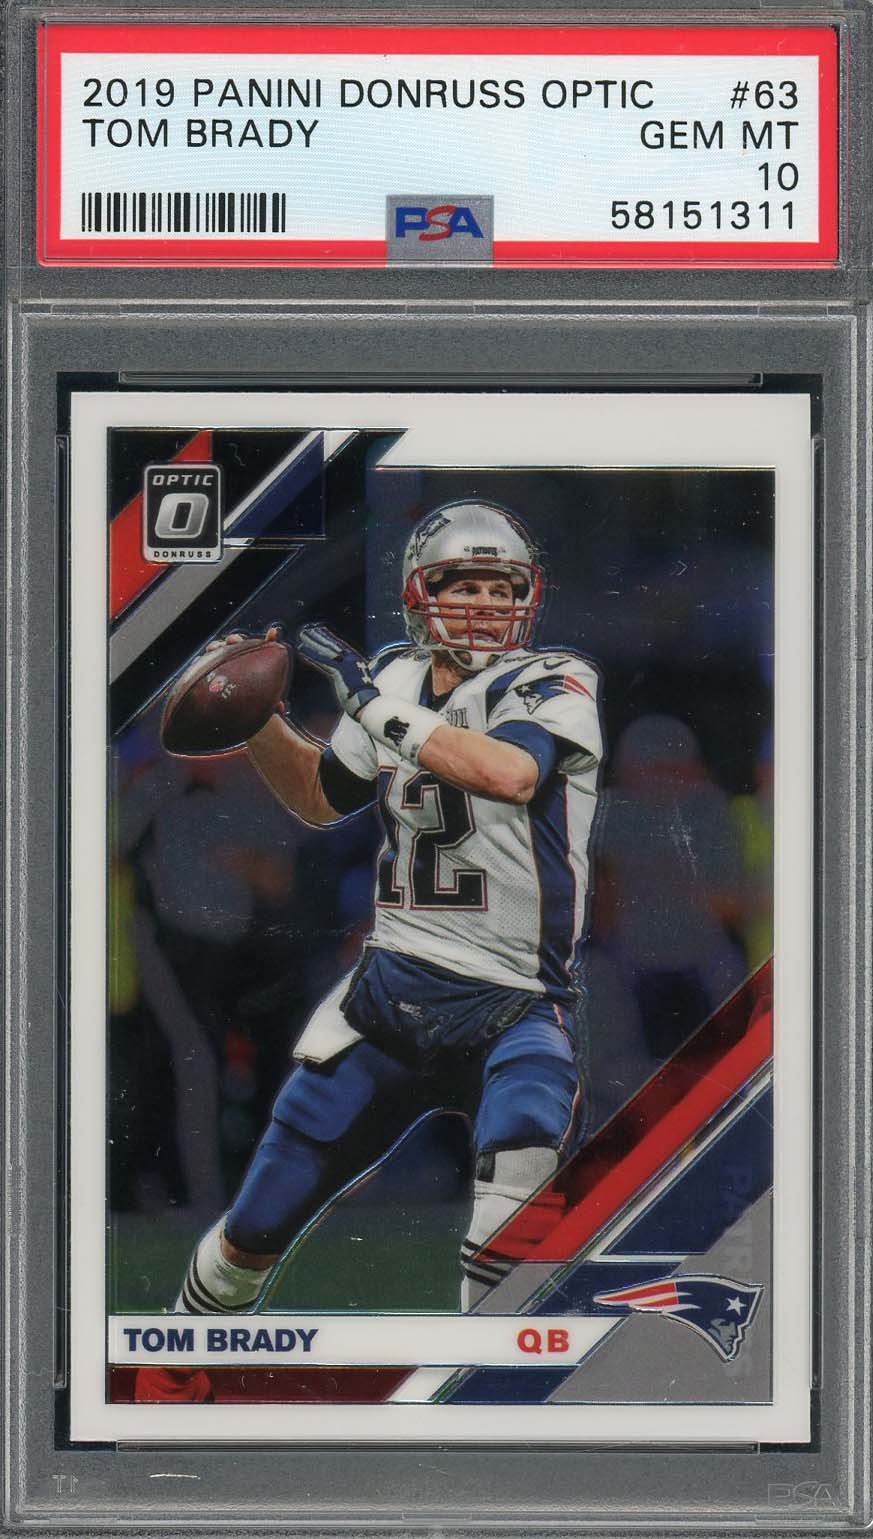 Tom Brady Autographs in Several 2018 Panini Football Products